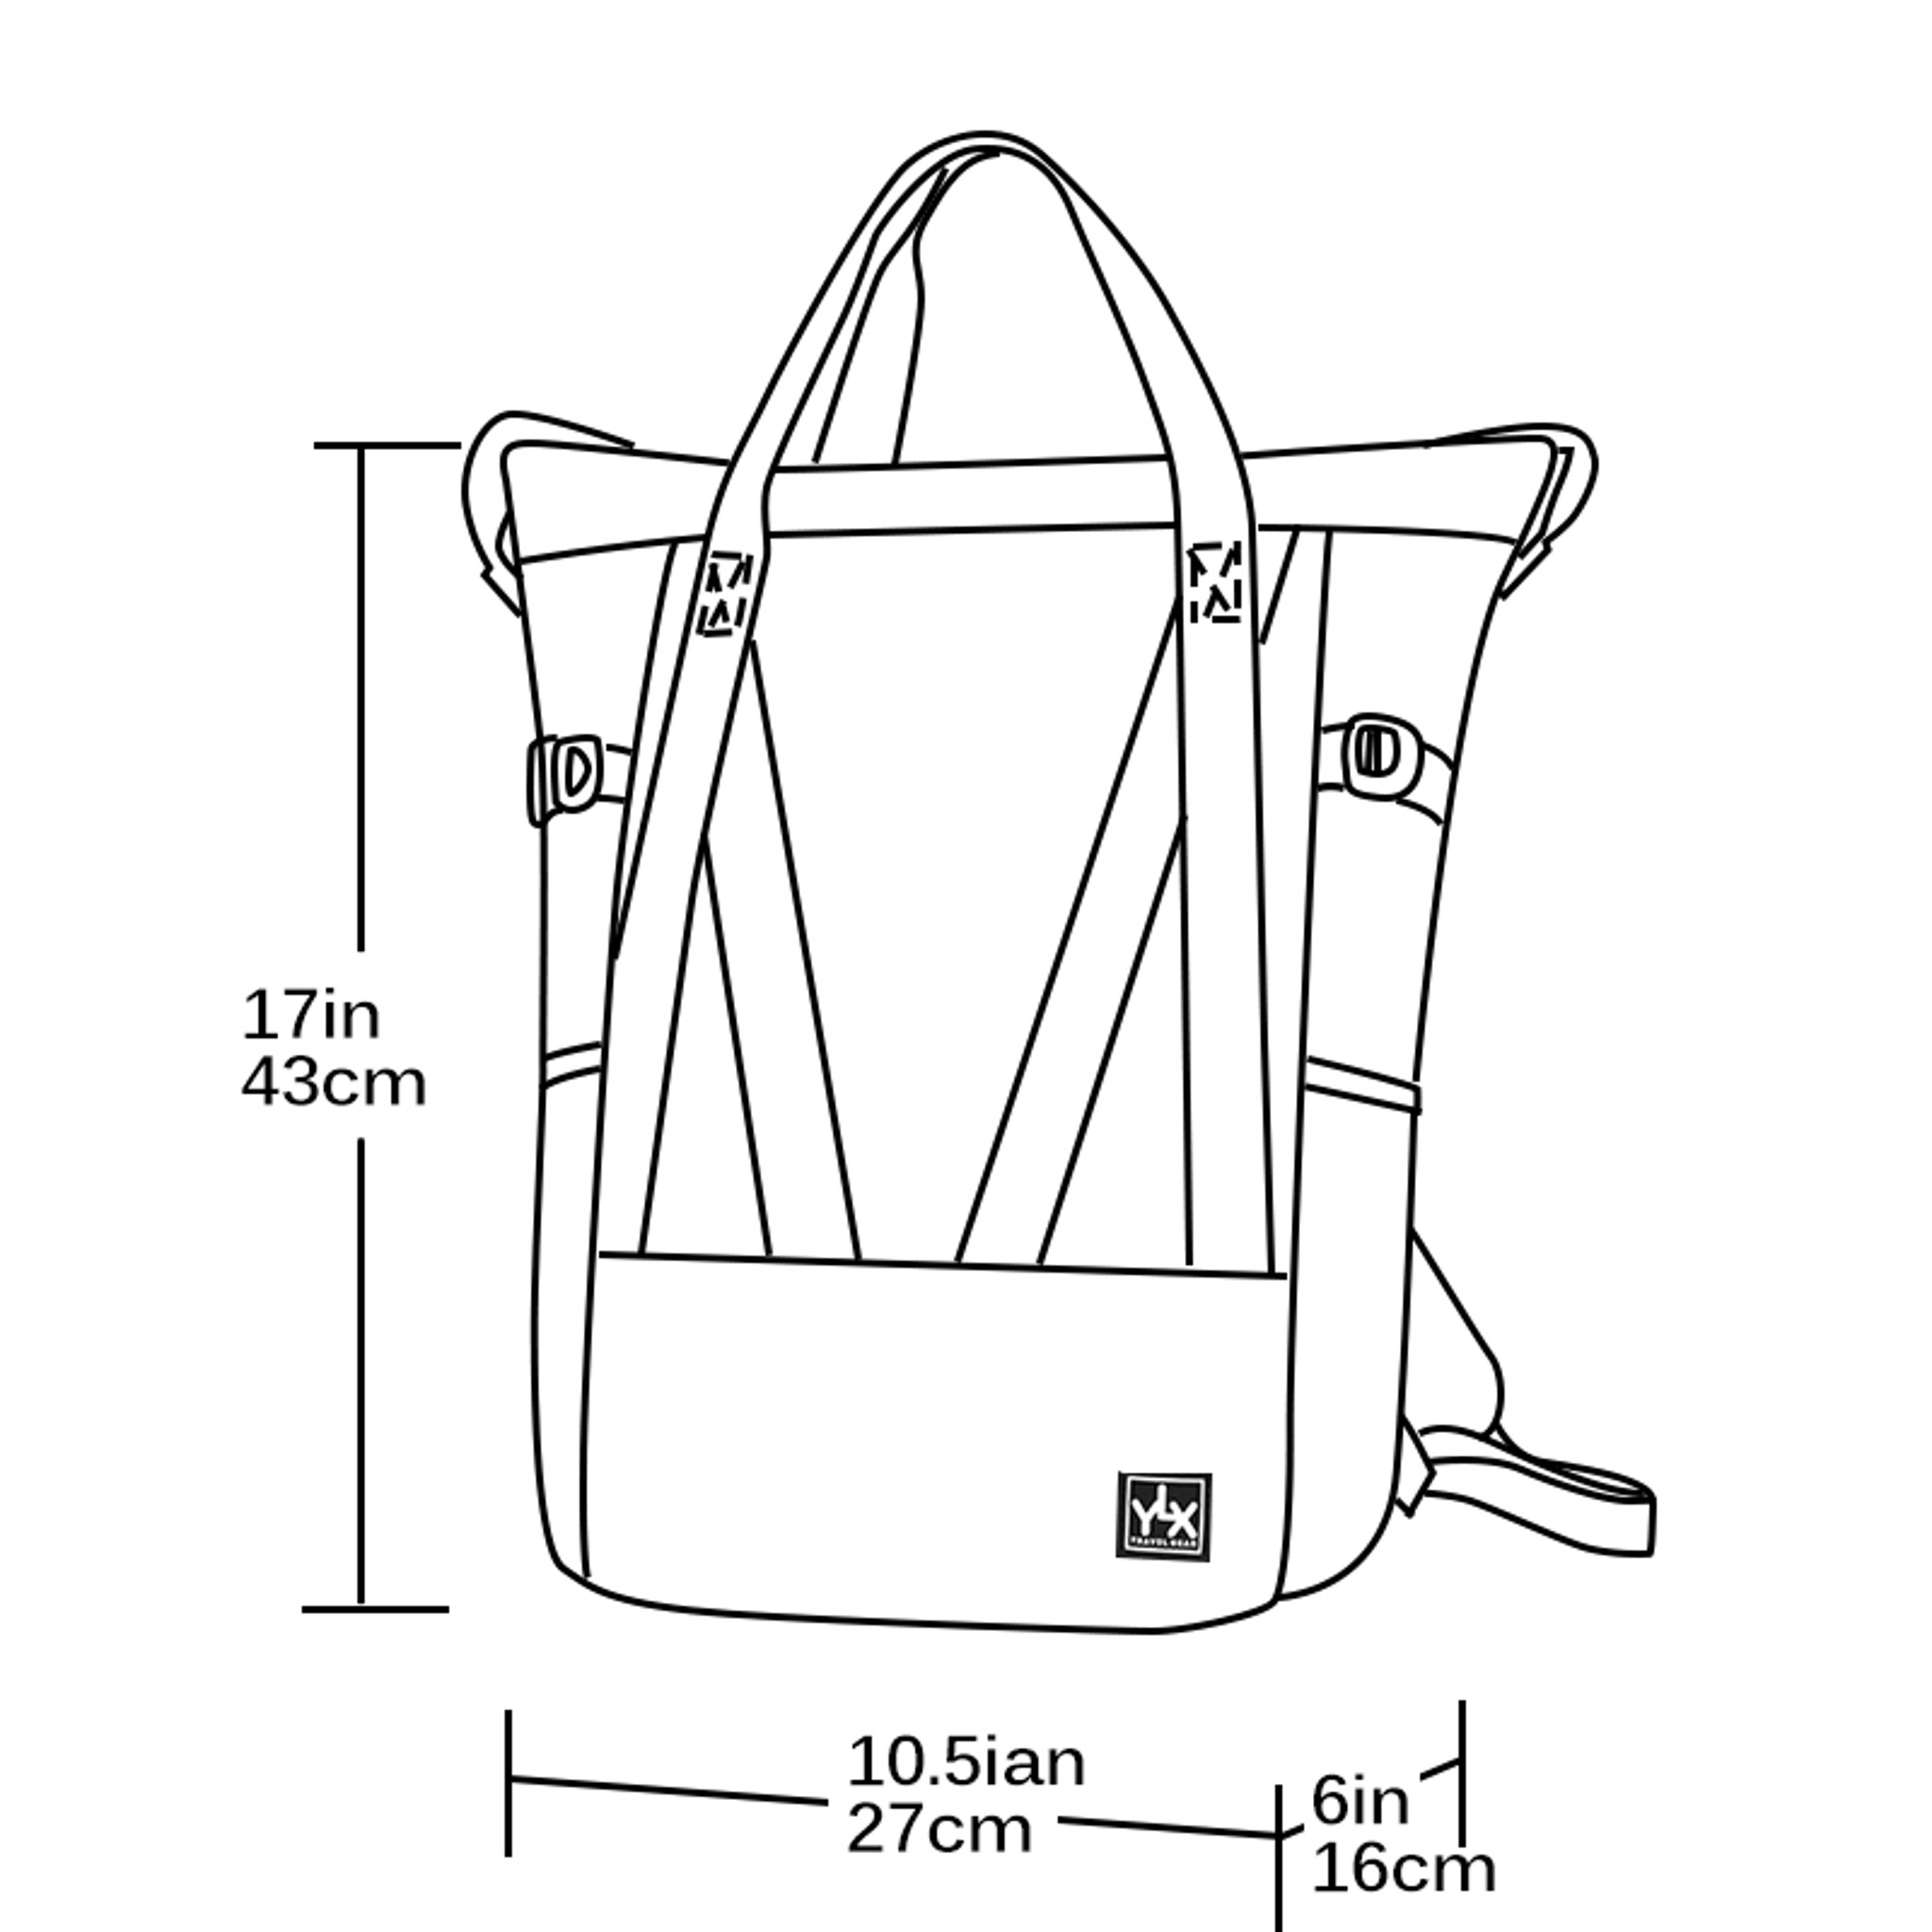 YLX Signature Totepack Dimensions